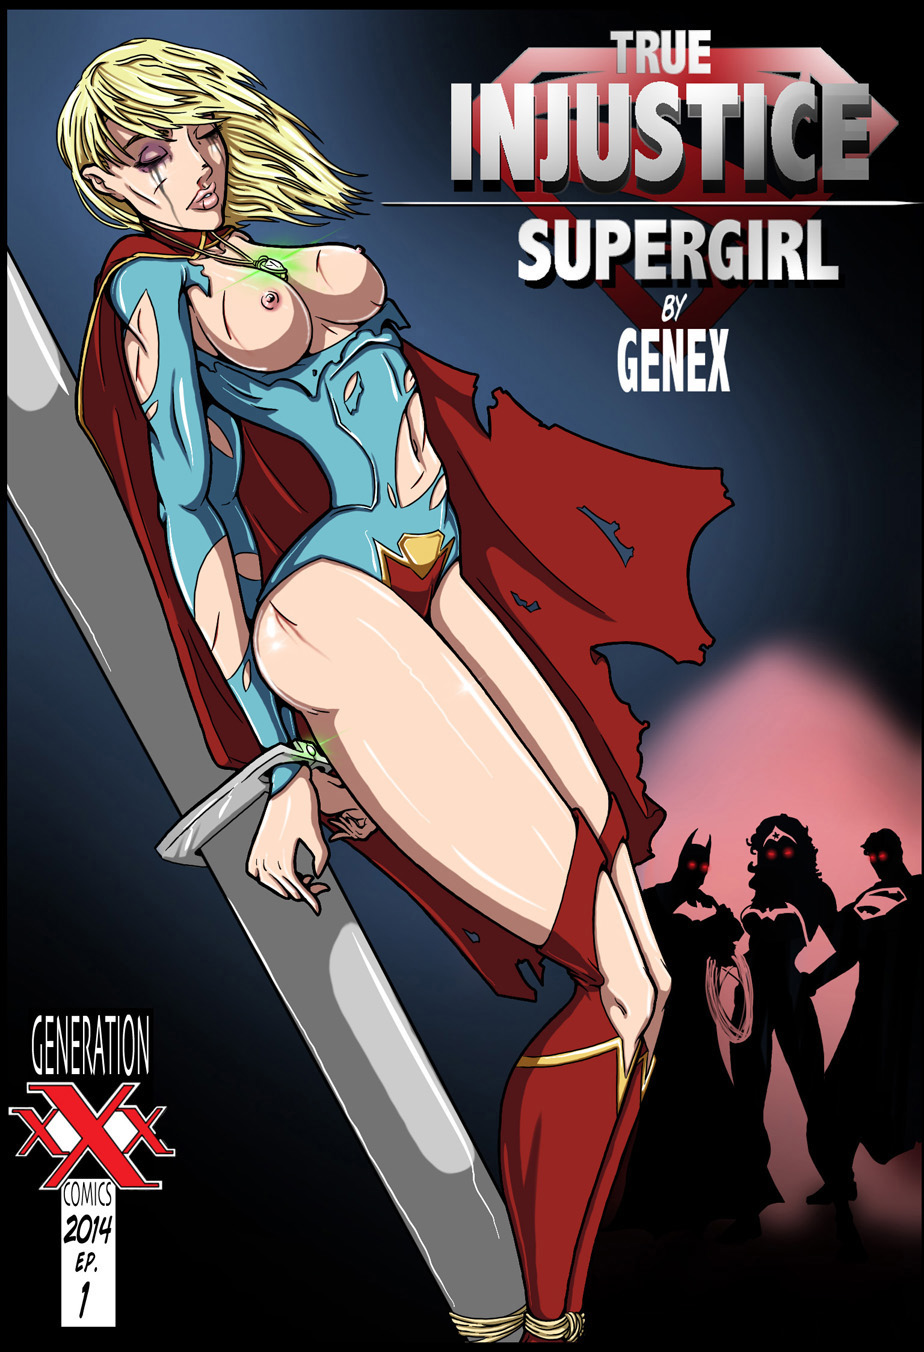 True Injustice Supergirl Justice League Ongoing00 1